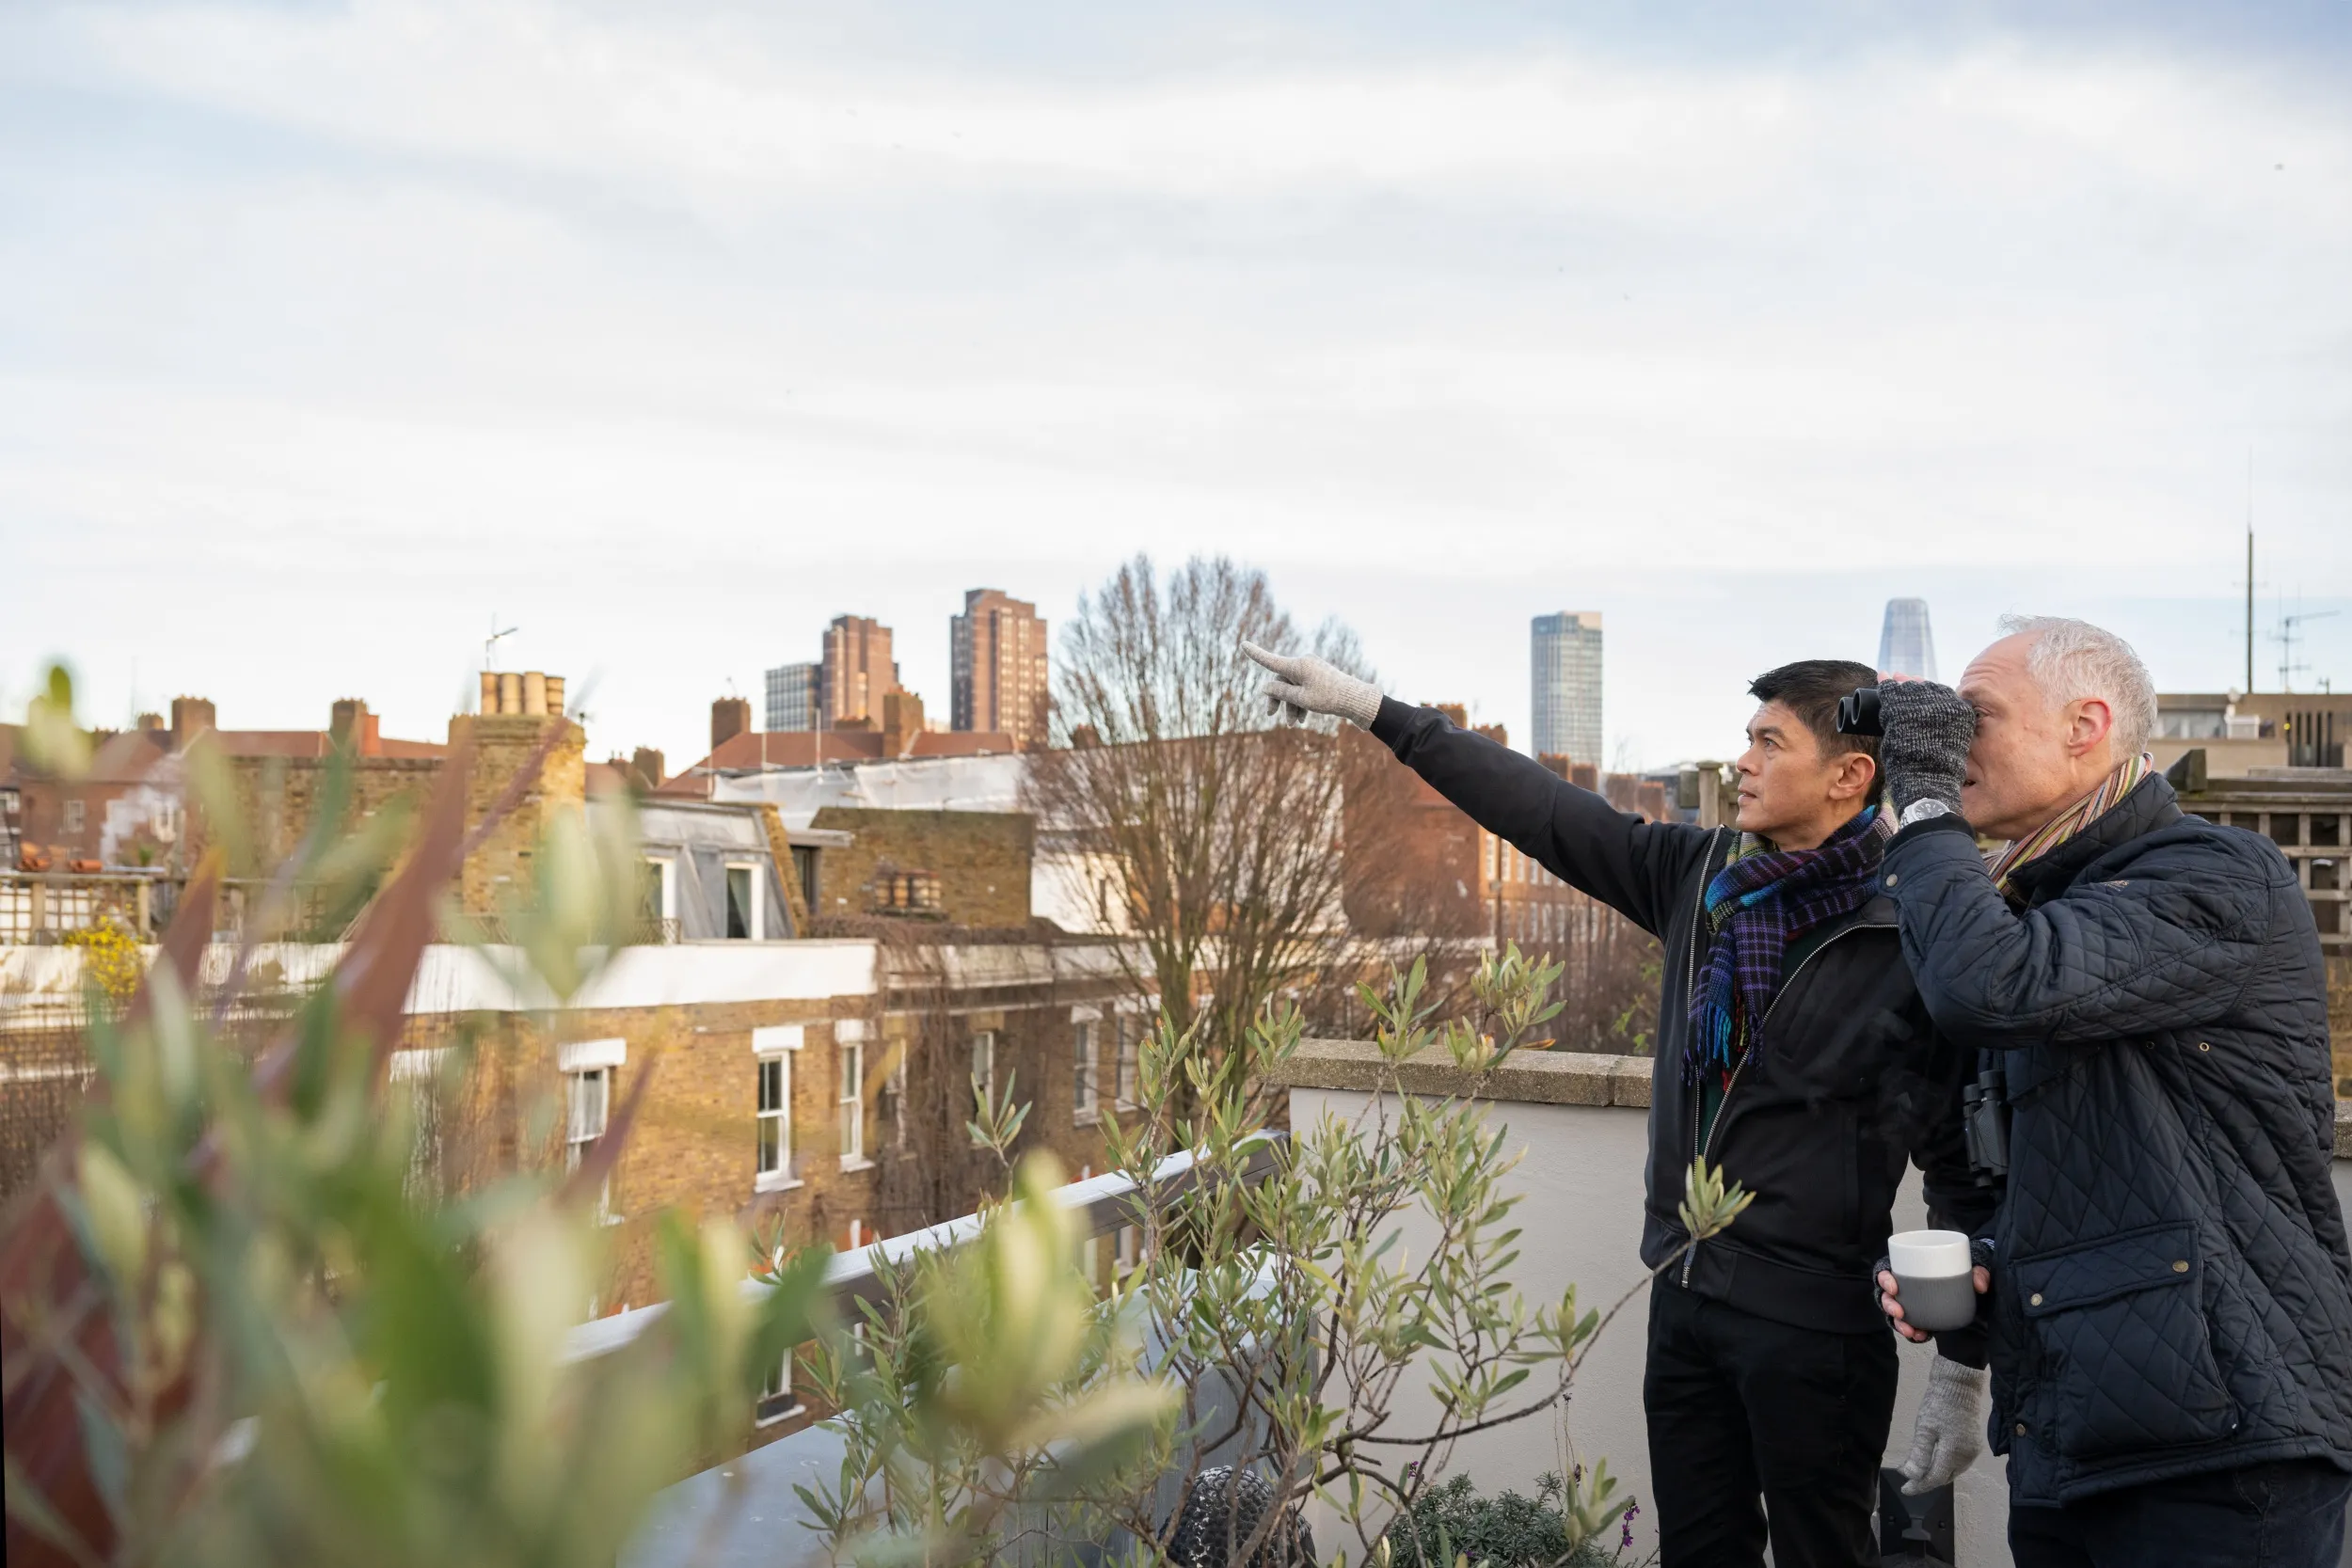 Two people birdwatching from an urban rooftop.